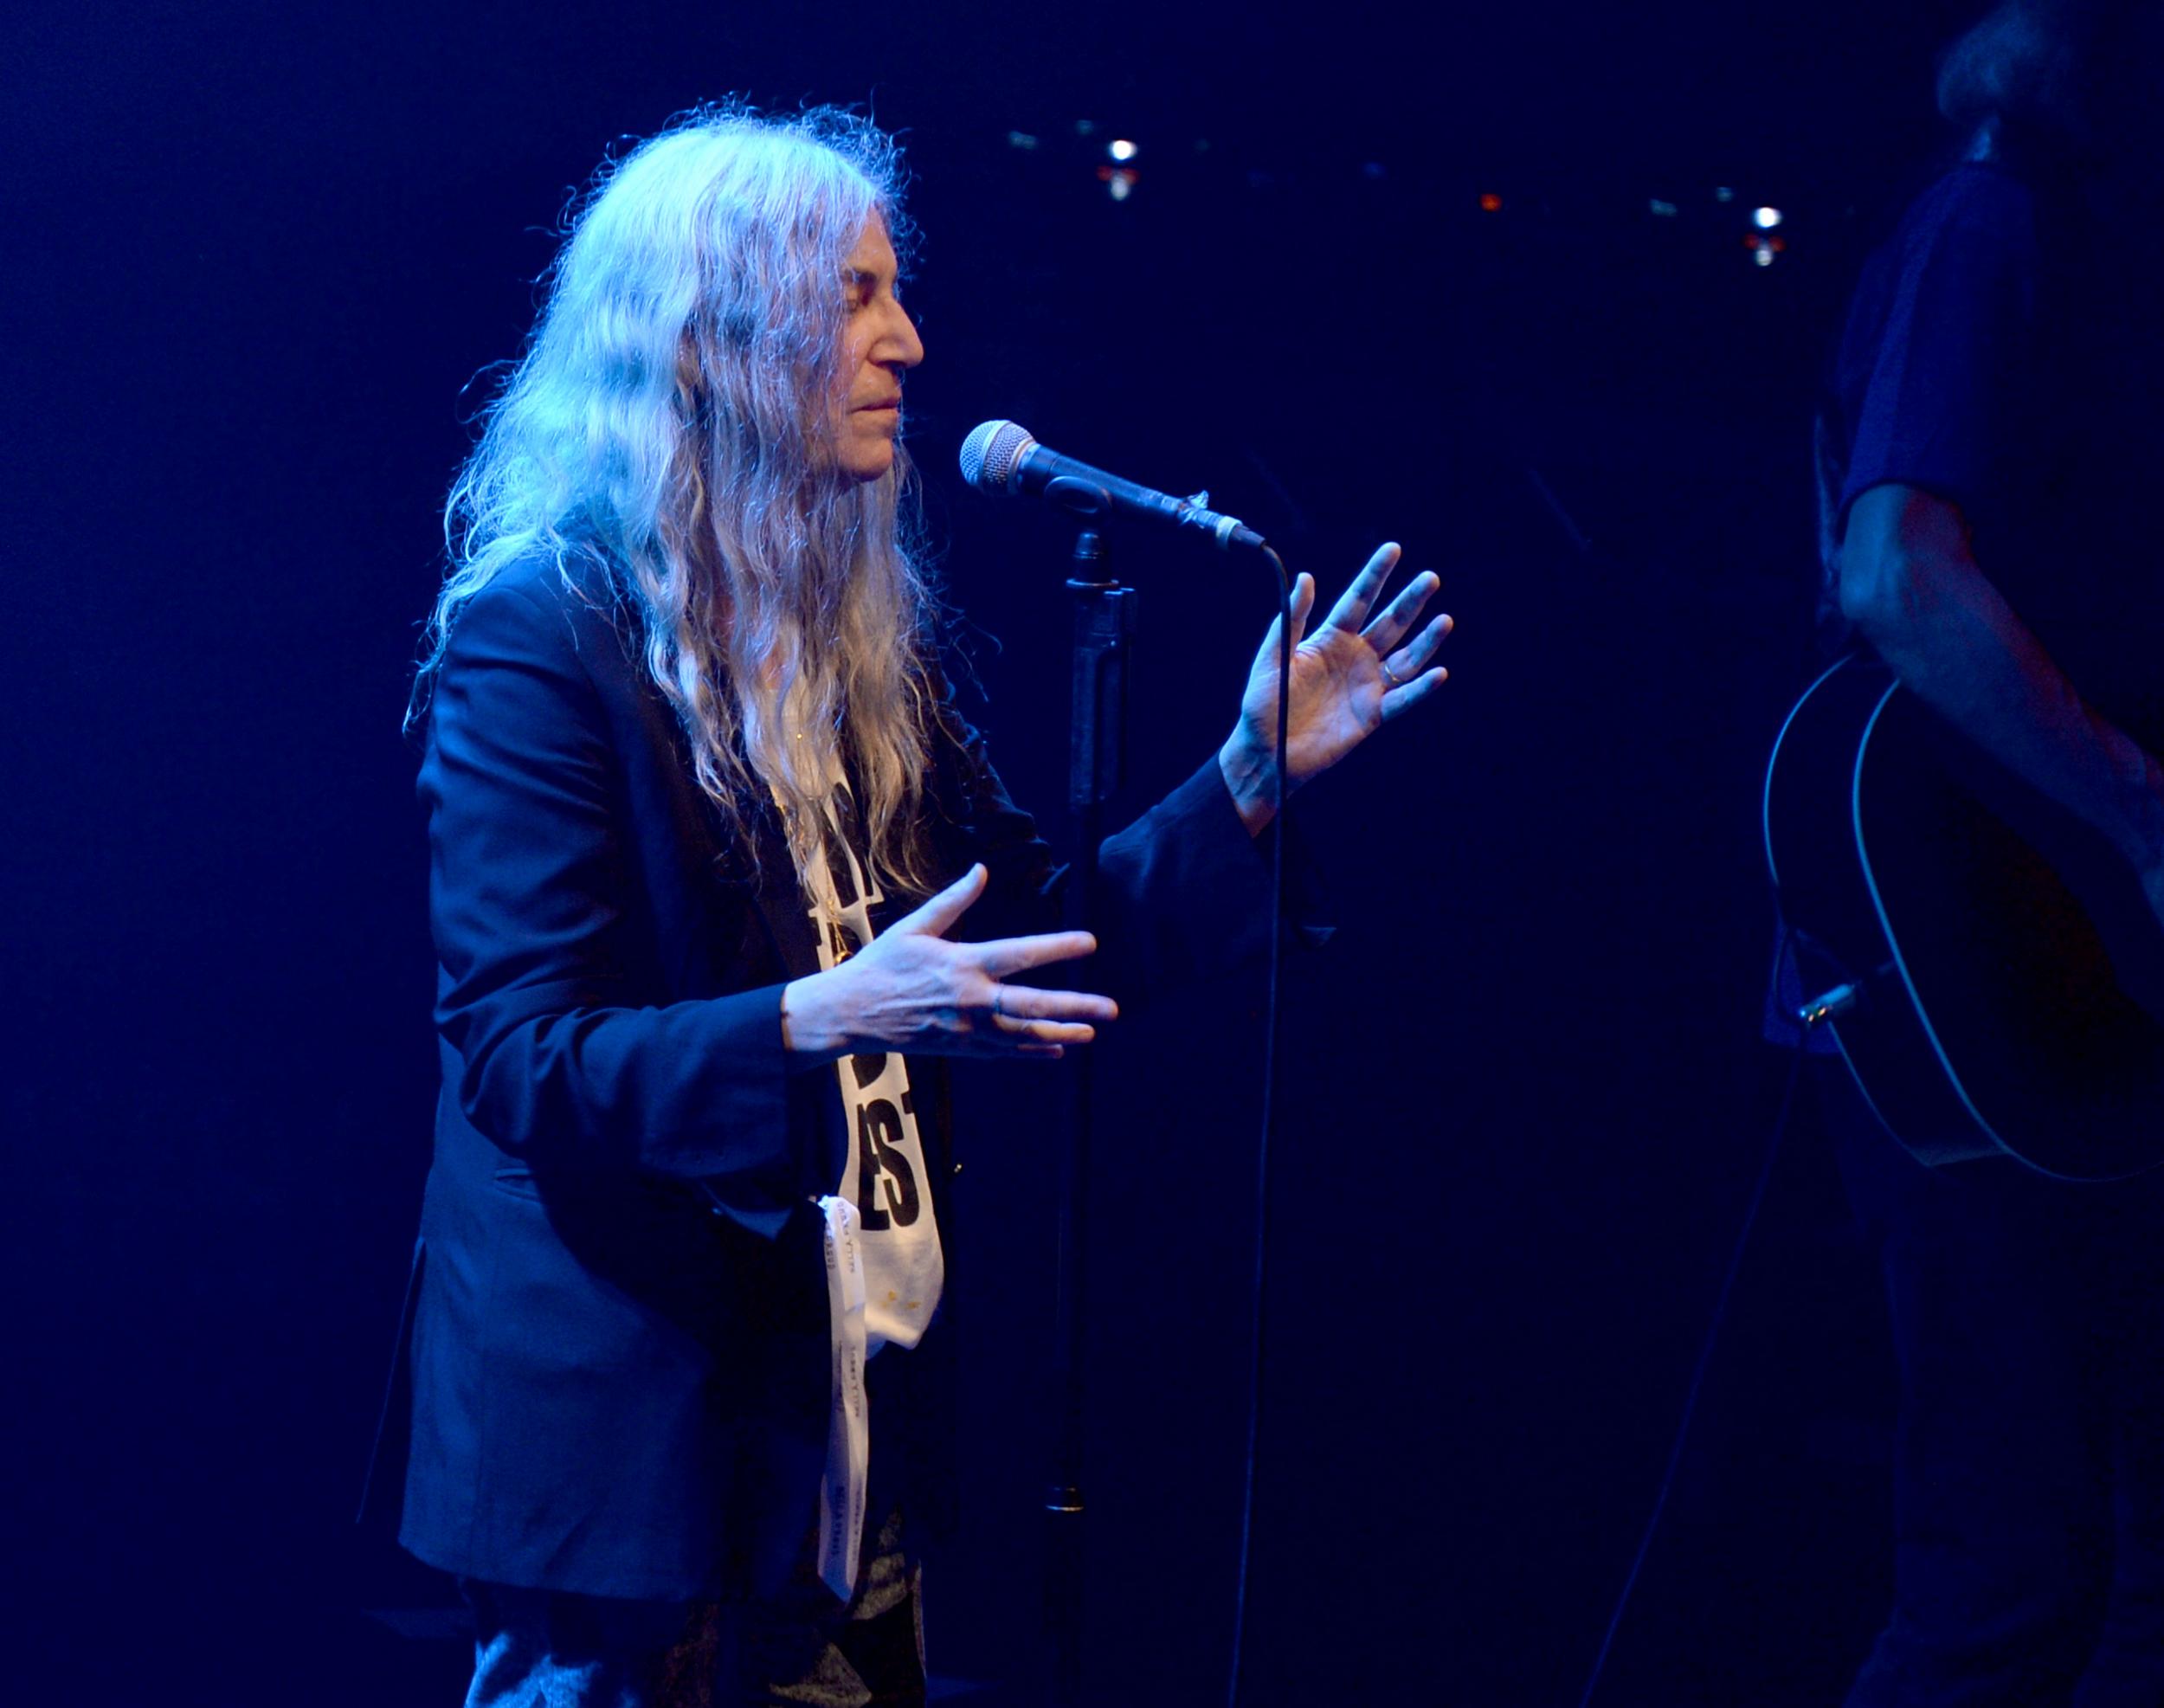 Patti Smith performs at Hoping For Palestine’s event in London